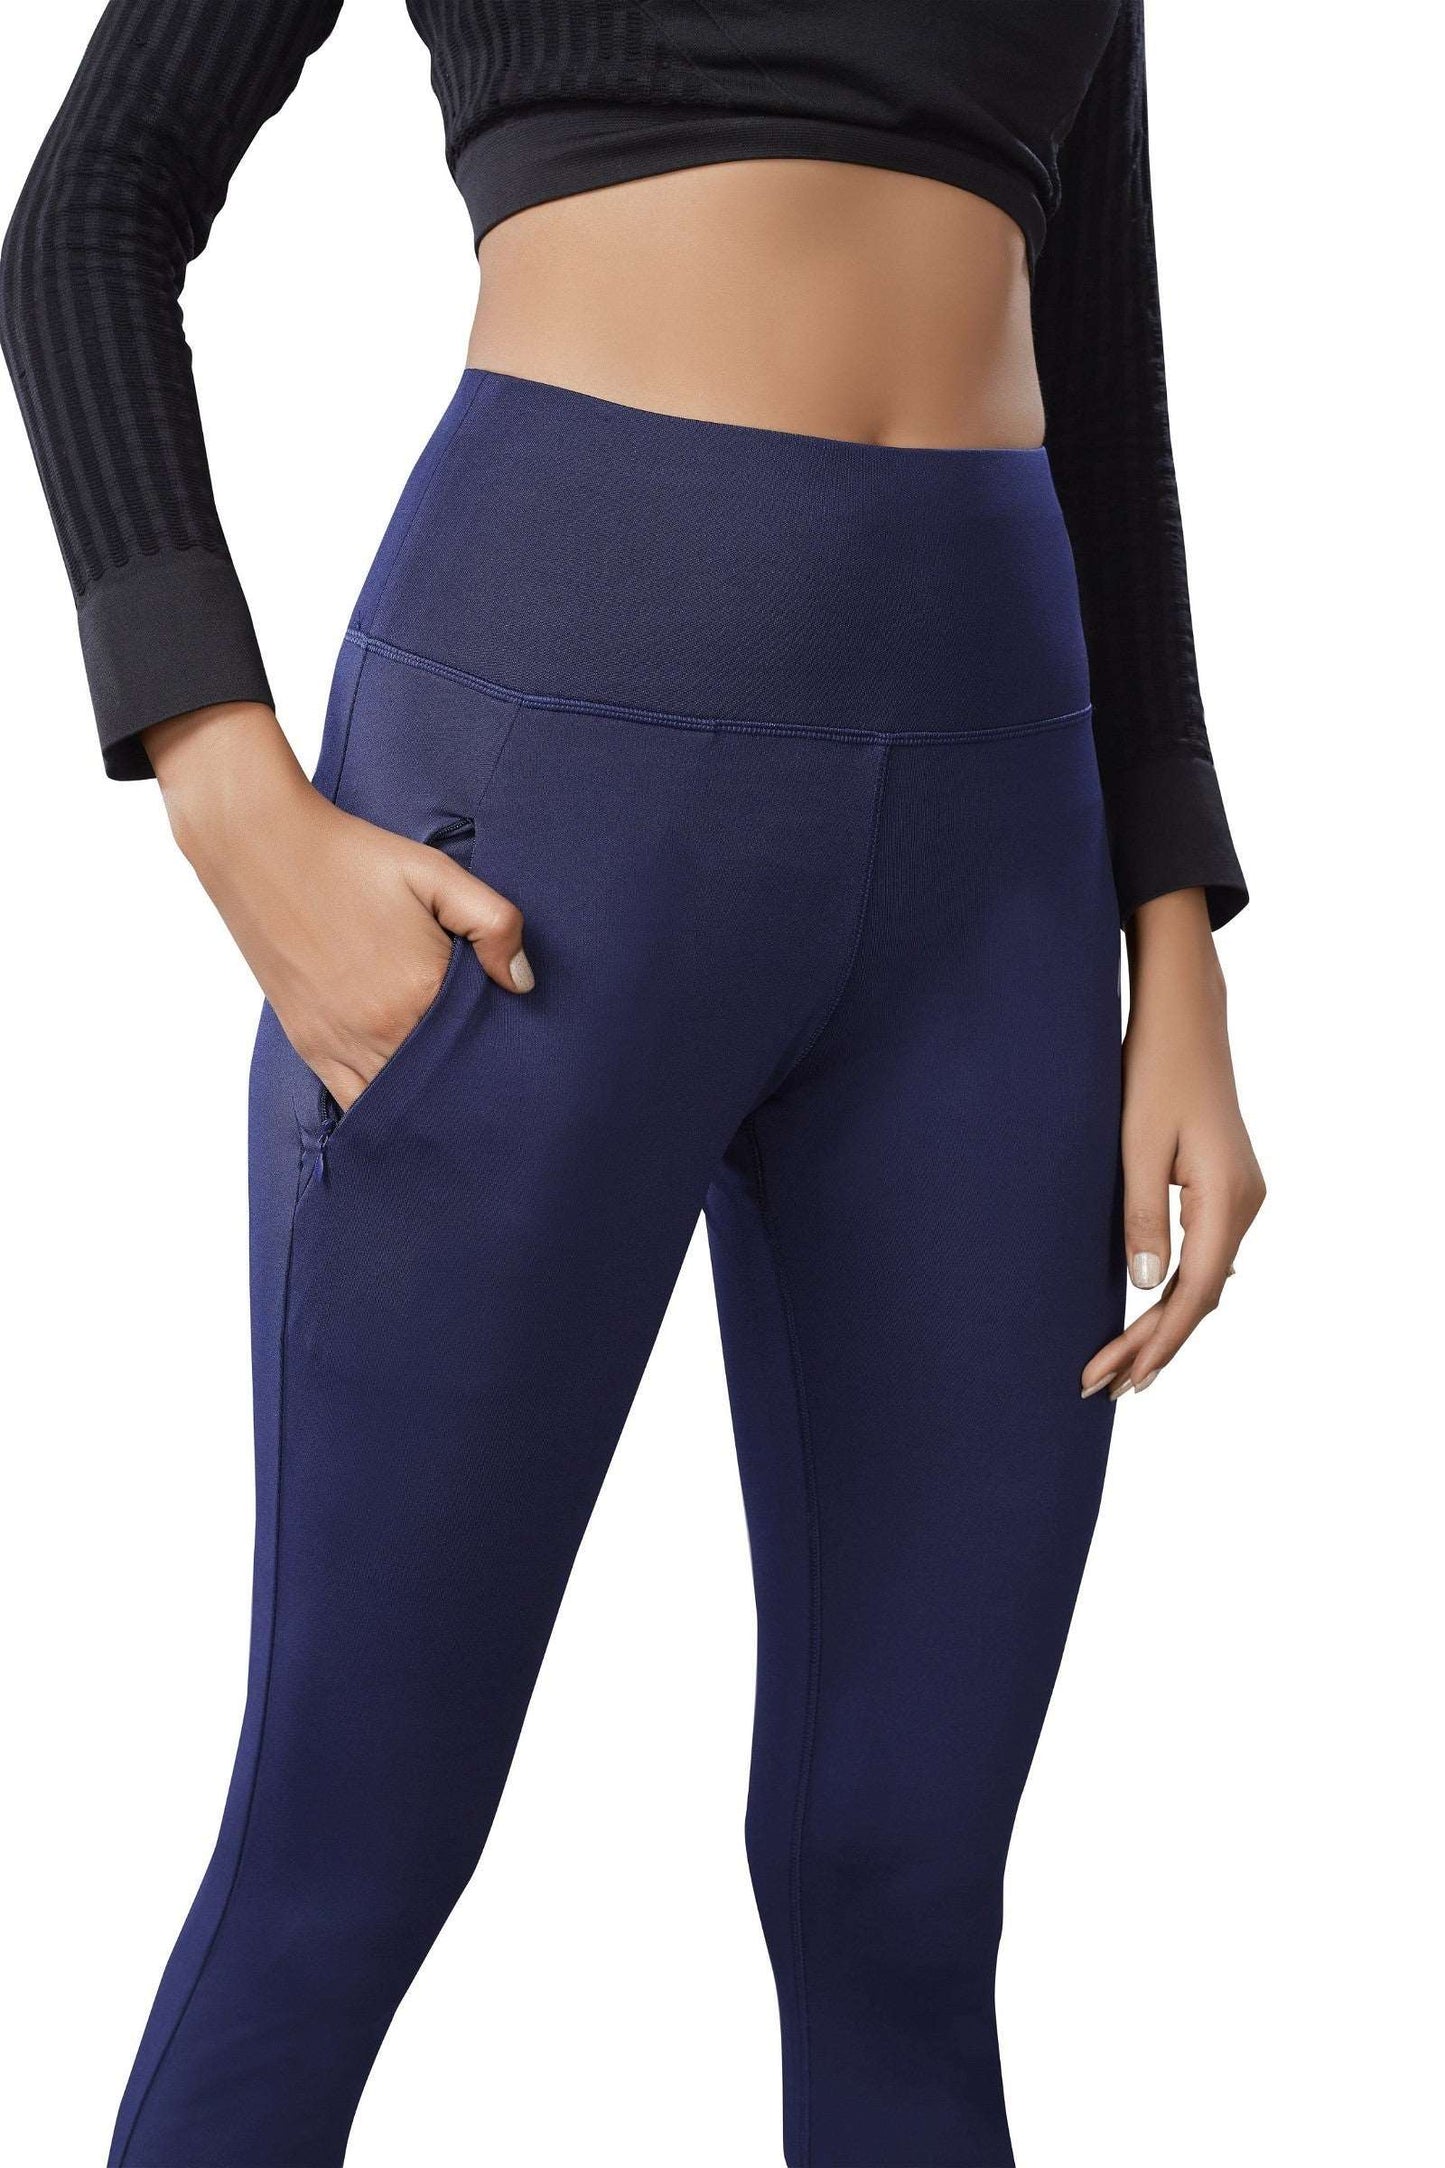 The model in the image is wearing Blue Colour Polyester Solid Pattern Track Pant For Women's from Alice Milan. Crafted with the finest materials and impeccable attention to detail, the Track Pant looks premium, trendy, luxurious and offers unparalleled comfort. It’s a perfect clothing option for loungewear, resort wear, party wear or for an airport look. The woman in the image looks happy, and confident with her style statement putting a happy smile on her face.